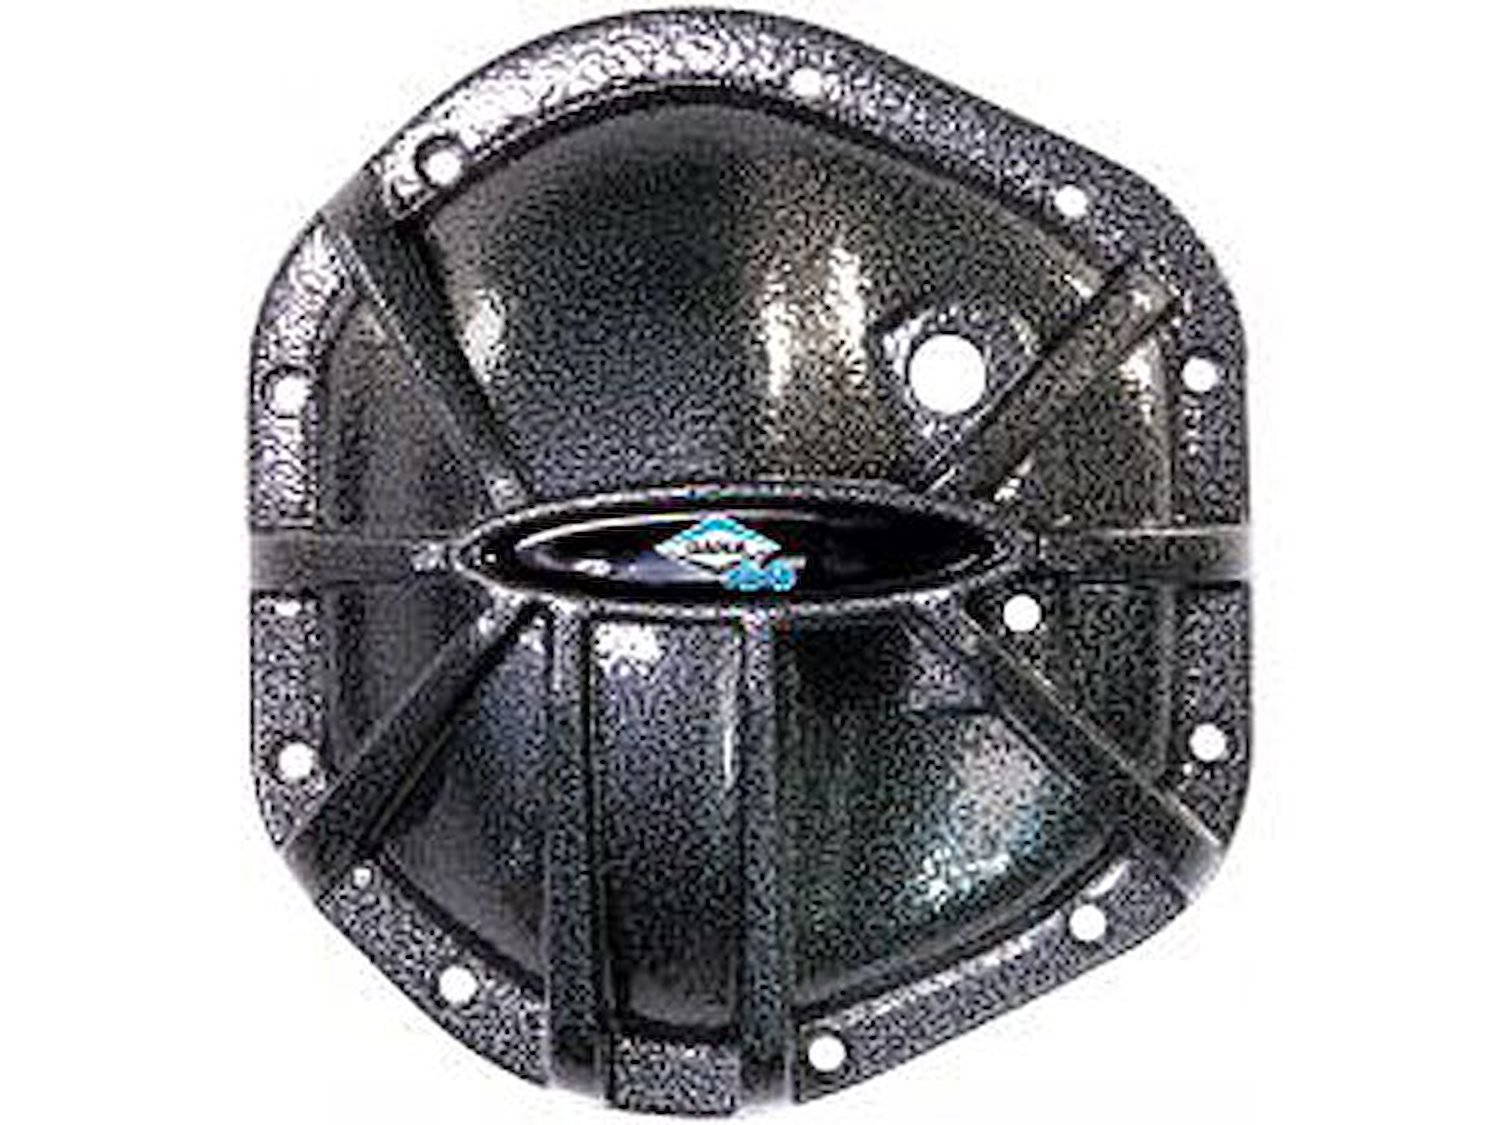 Nodular Iron Performance Differential Cover Fits Dana 44 Rear Axle